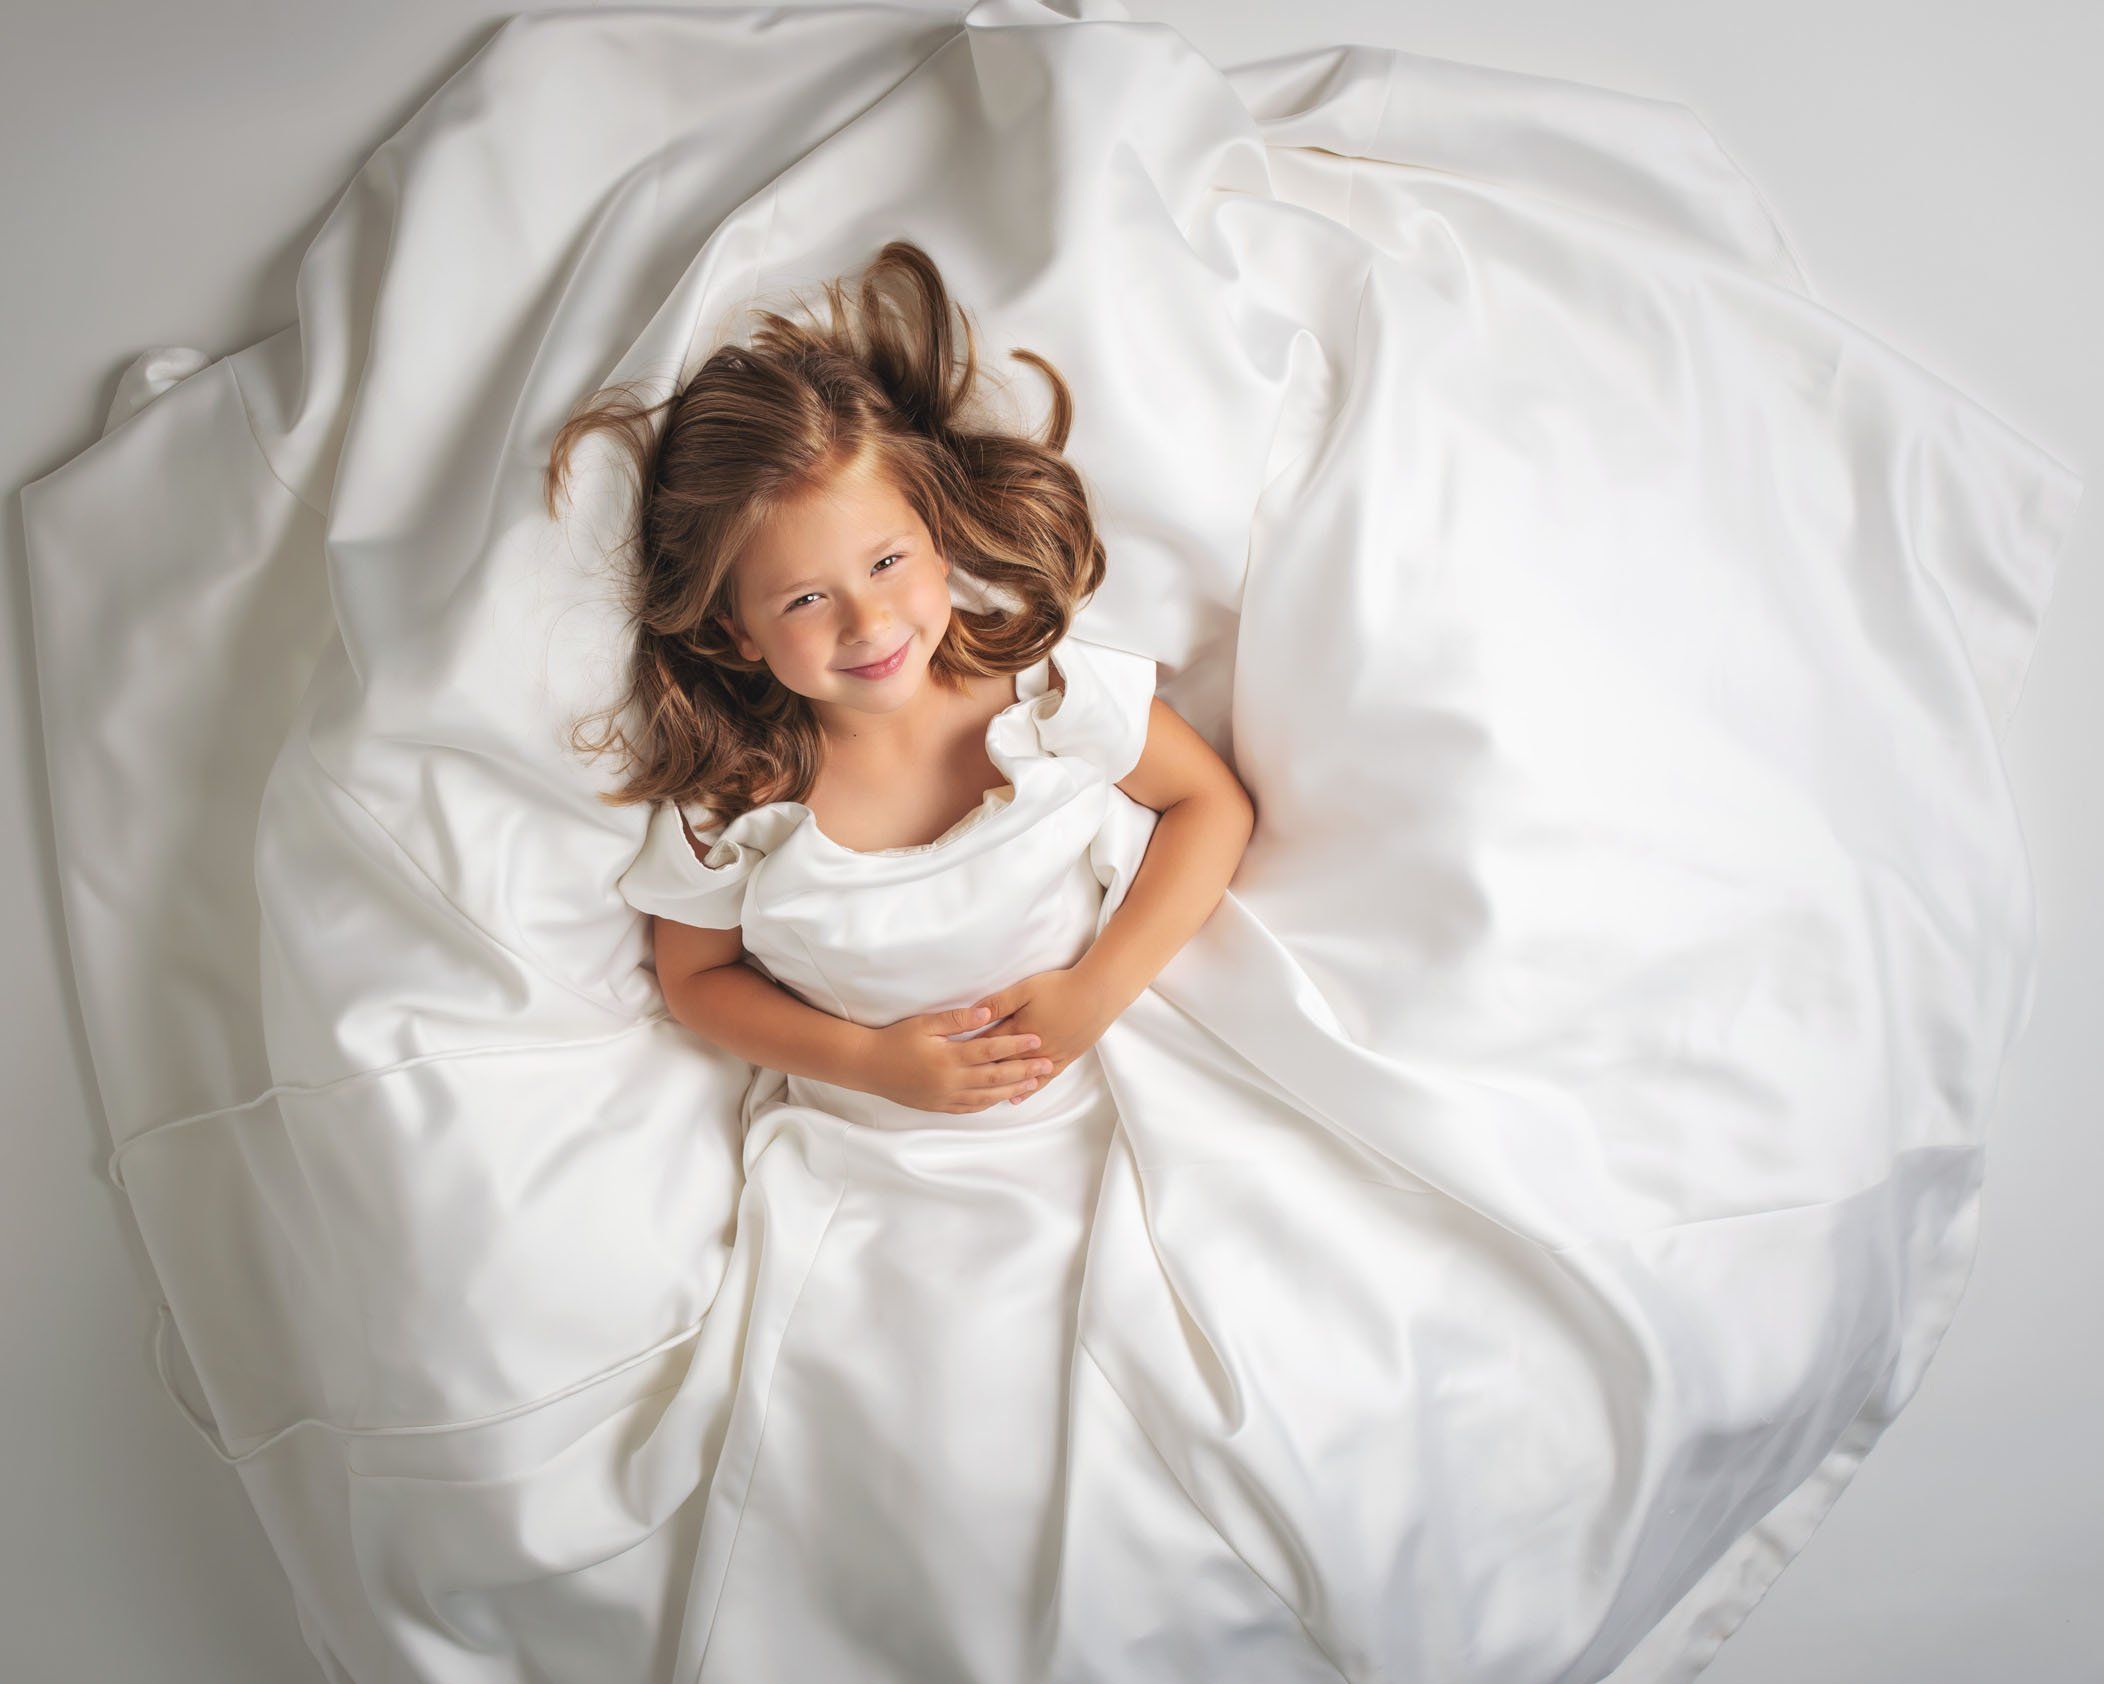 5 year old girl lying on the floor in her mom's wedding dress